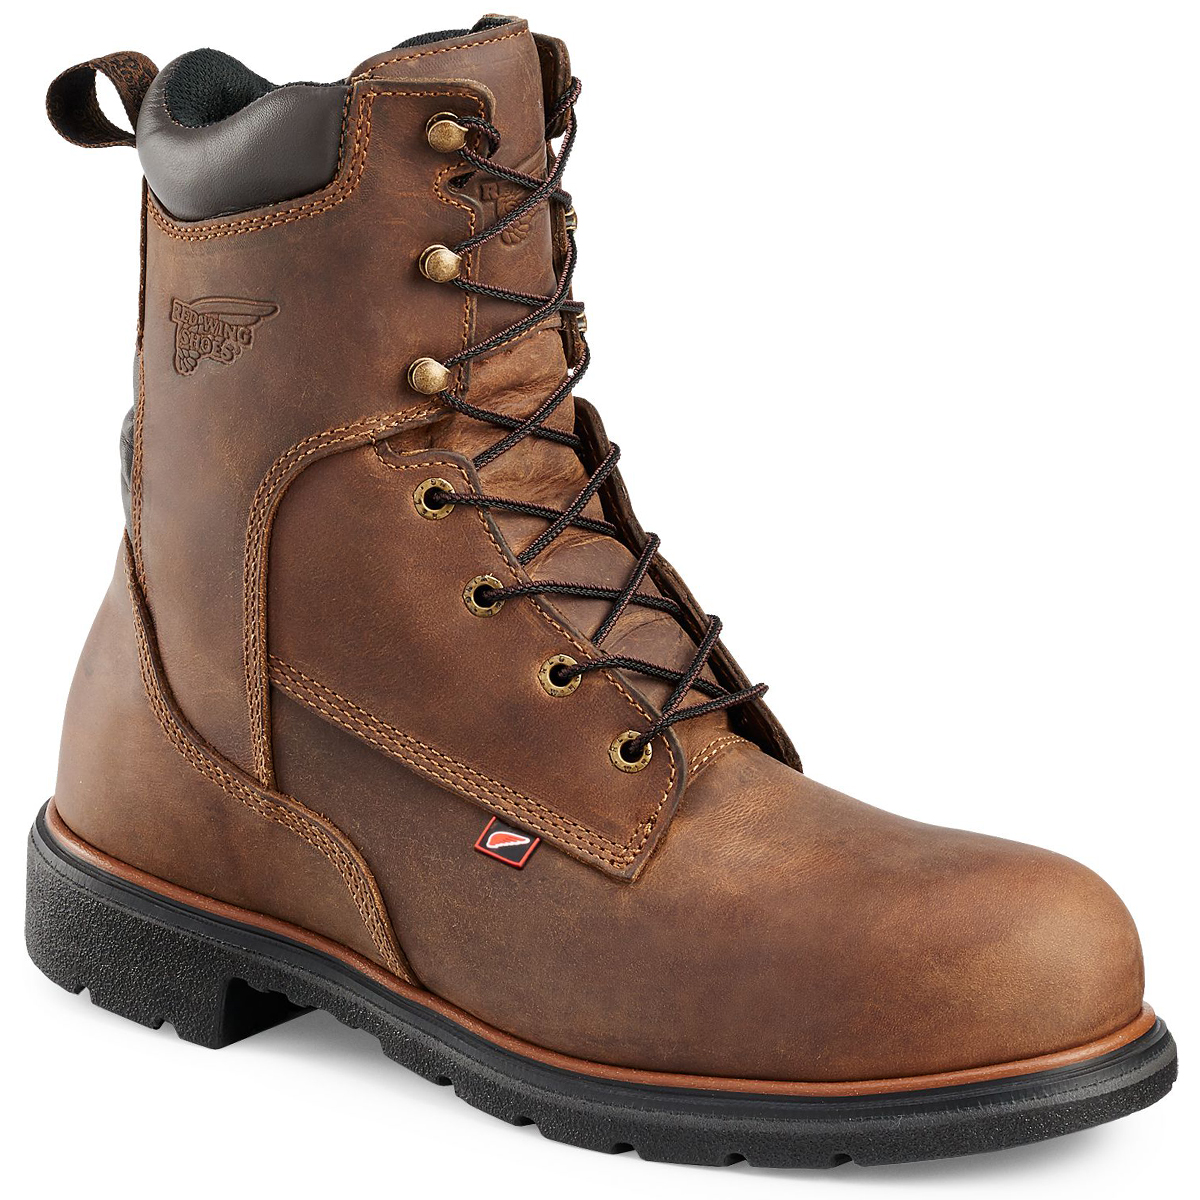 Red Wing Men's Dynaforce 8" Safety Toe Work Boots